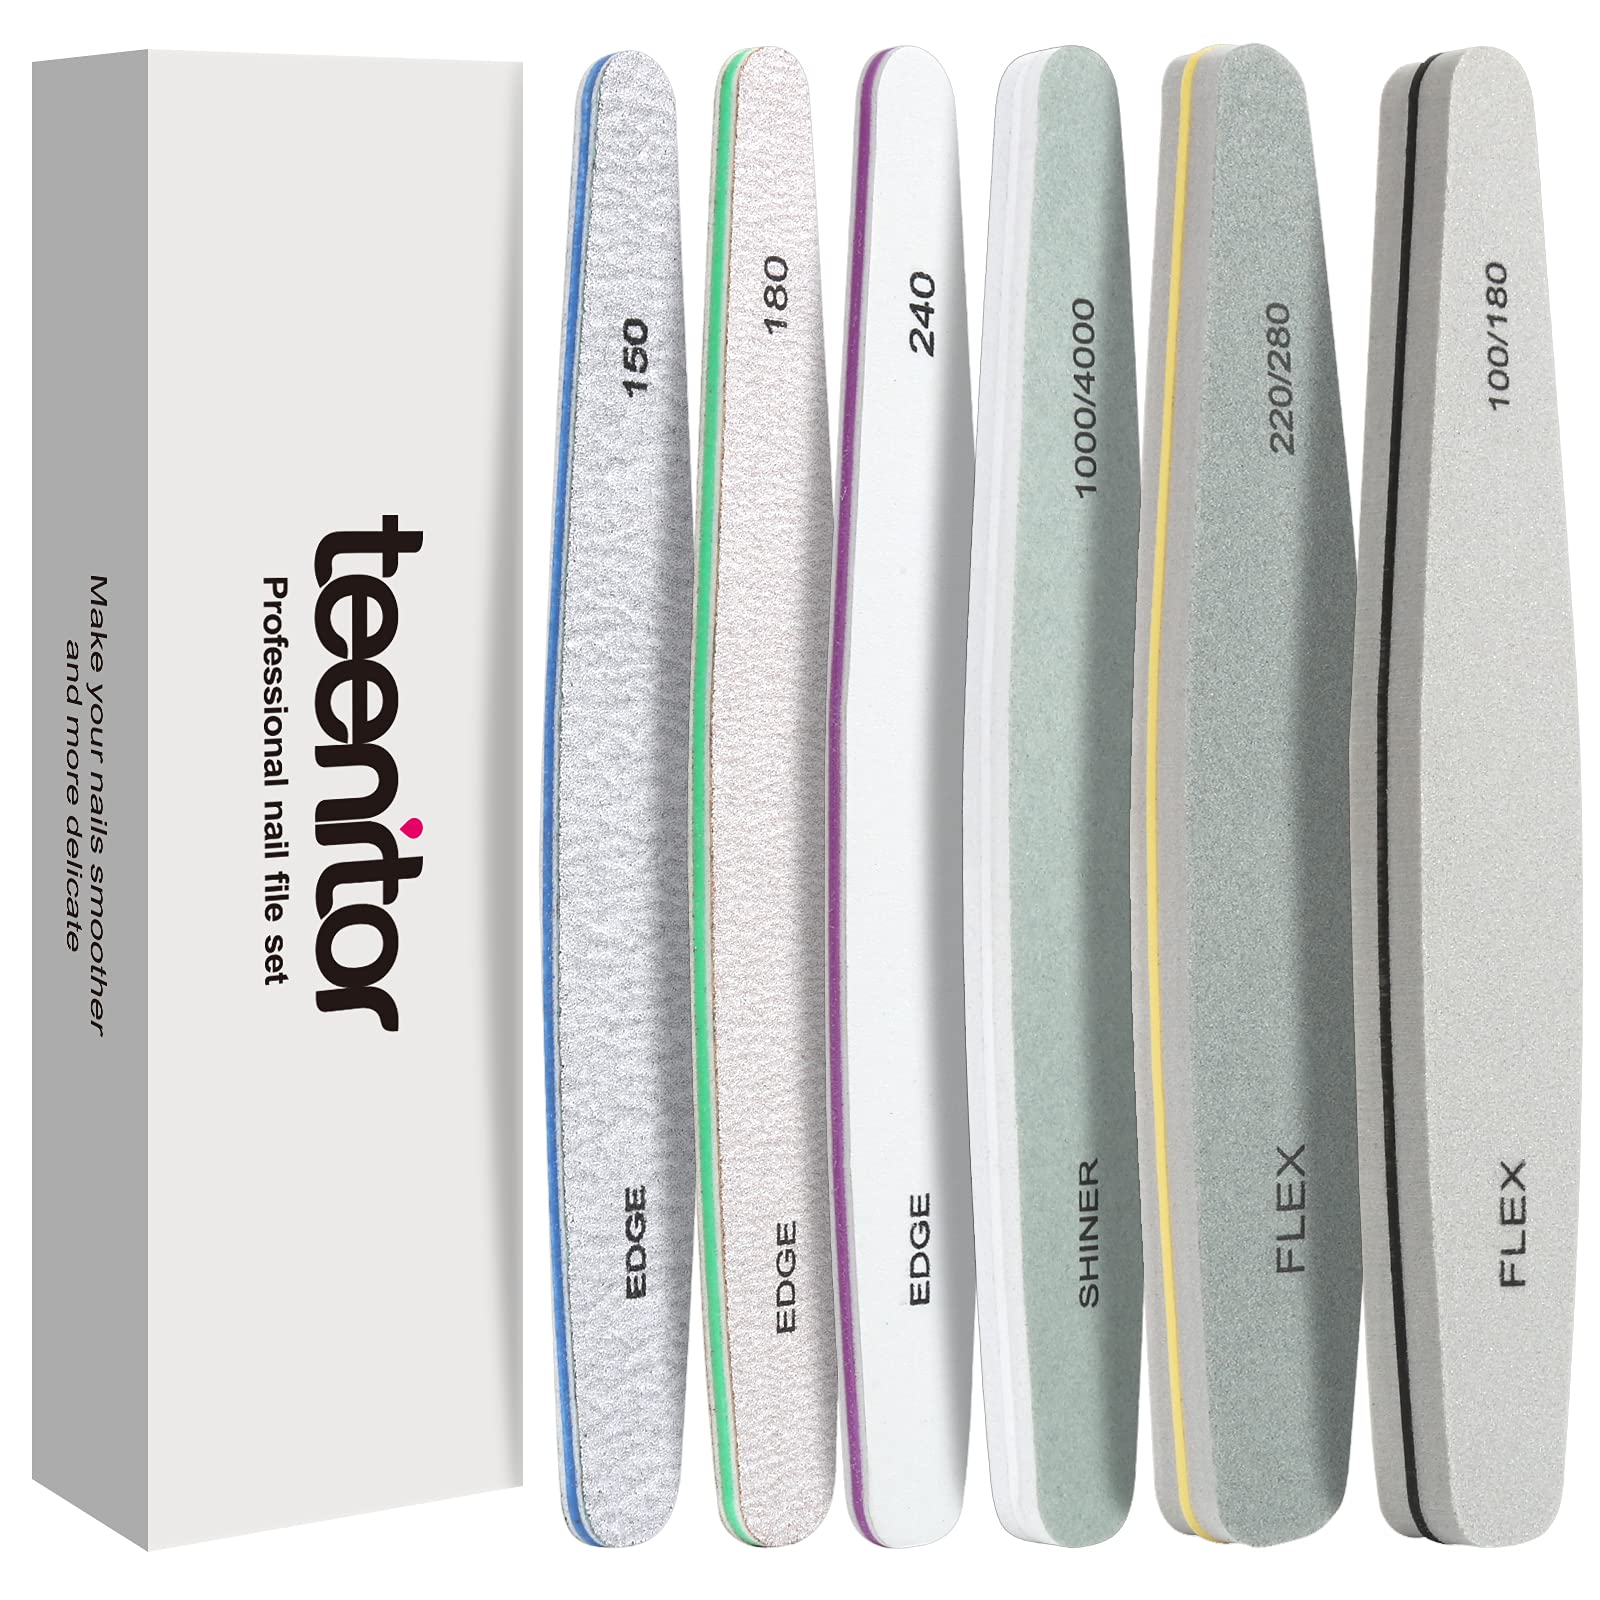 Nail File, Teenitor Gel Nail File Set Professional Nail Buffer File Block Natural Manicure File Nail Polisher Washable Double Sided Emery Boards Grit 100/150/180/220/240/280/1000/4000 Buffer